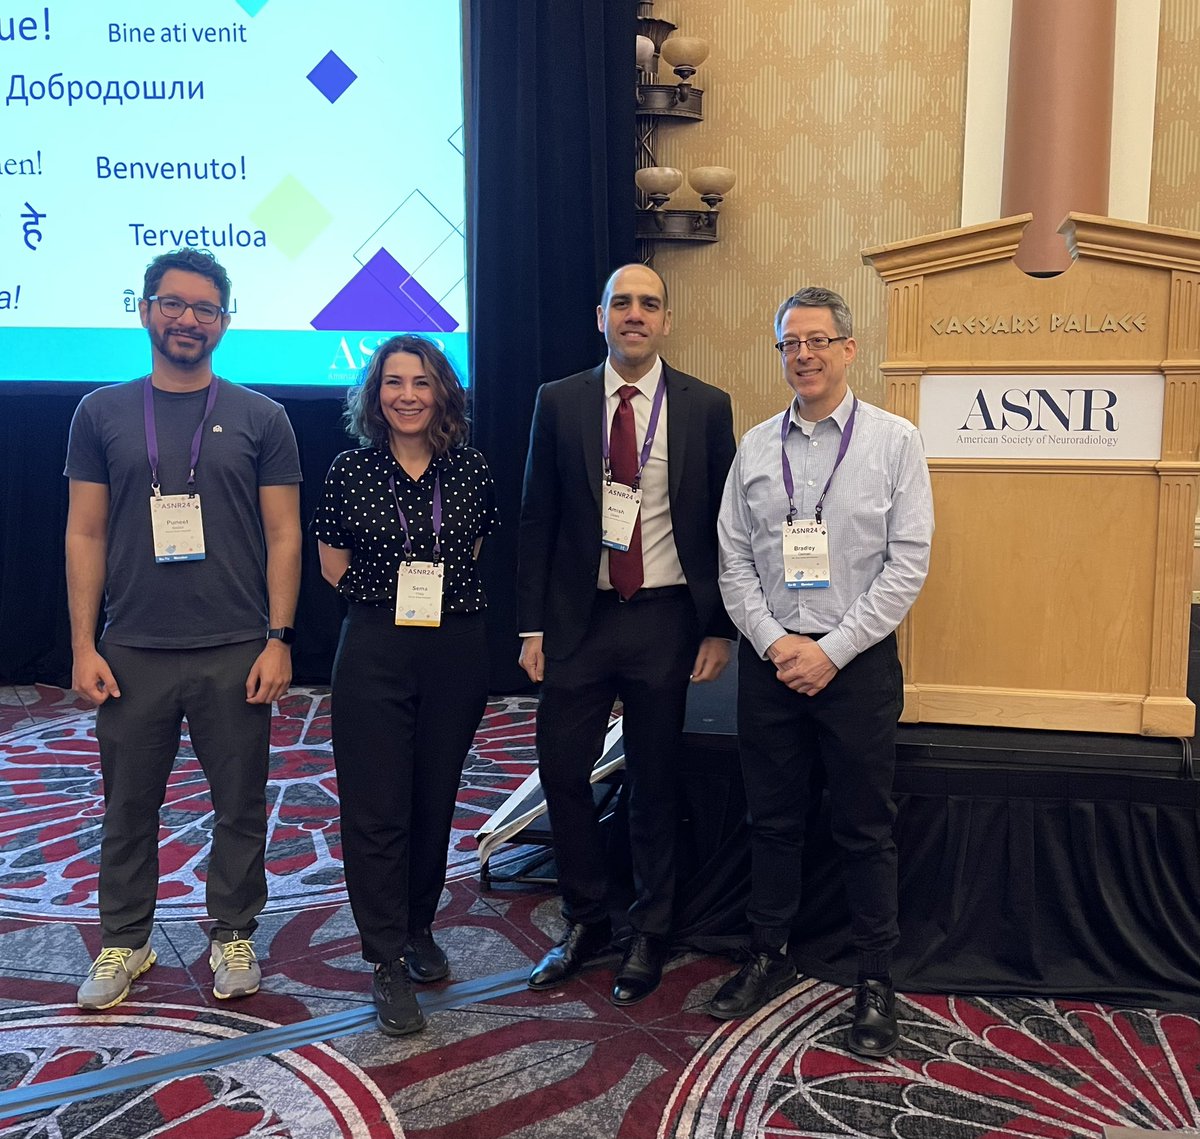 Brain-blowing talk from our chief, Dr. Doshi @AmishDoshiMD on AI in spine imaging at #ASNR24. Our Neurorad team had a great time together! #AIspine #AINeuroradiology @MountSinaiDMIR @BNDelman @semayildizneuro Dr. Puneet Belani